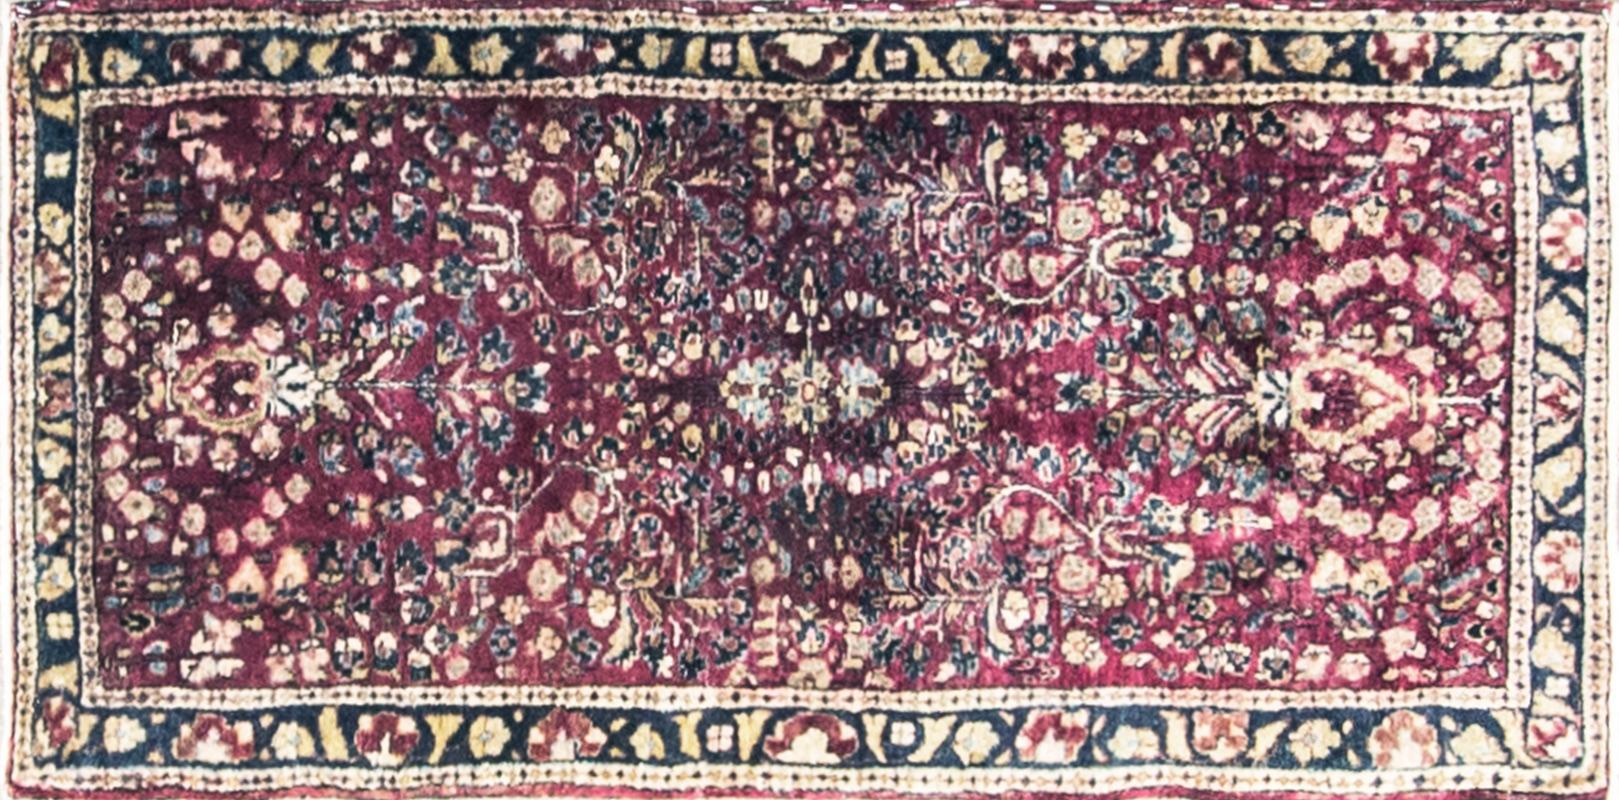 Persian Sarouk rug with allover motif on a red field in excellent condition. Measures: 2' x 4'1